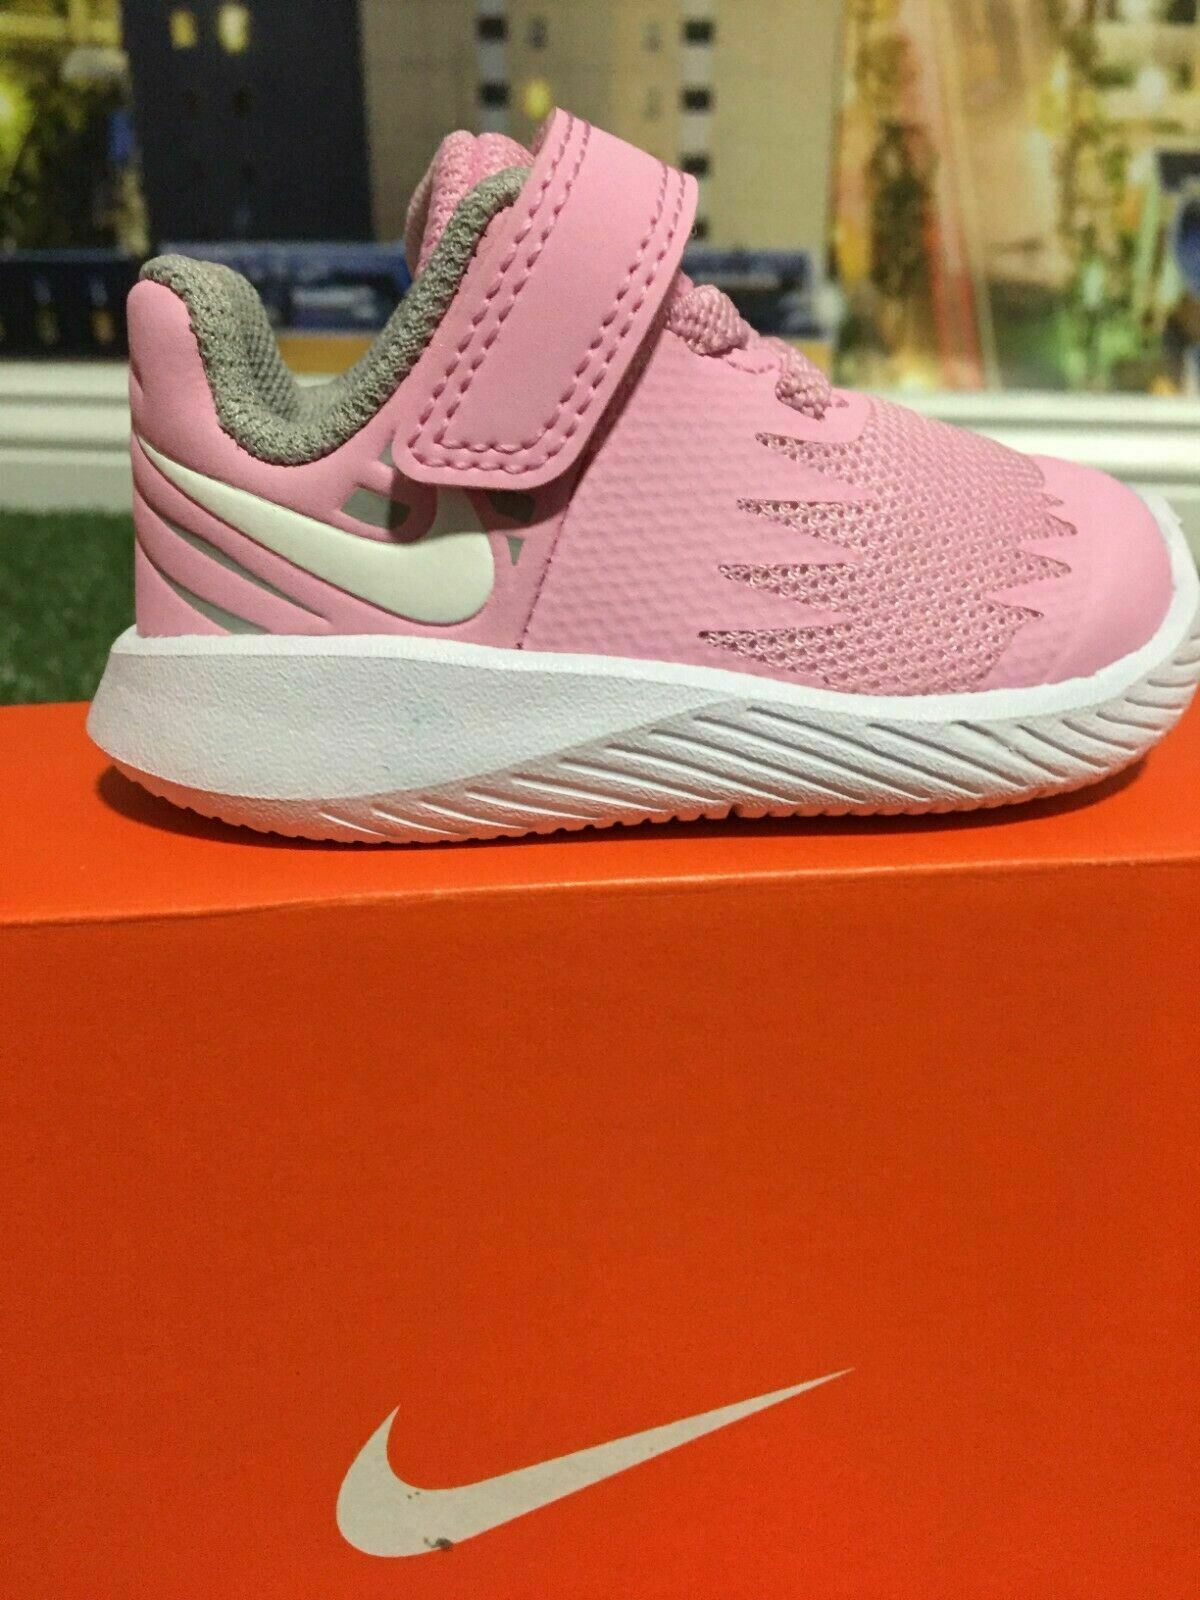 NWT Nike Baby shoes Pink 2C ( $43)